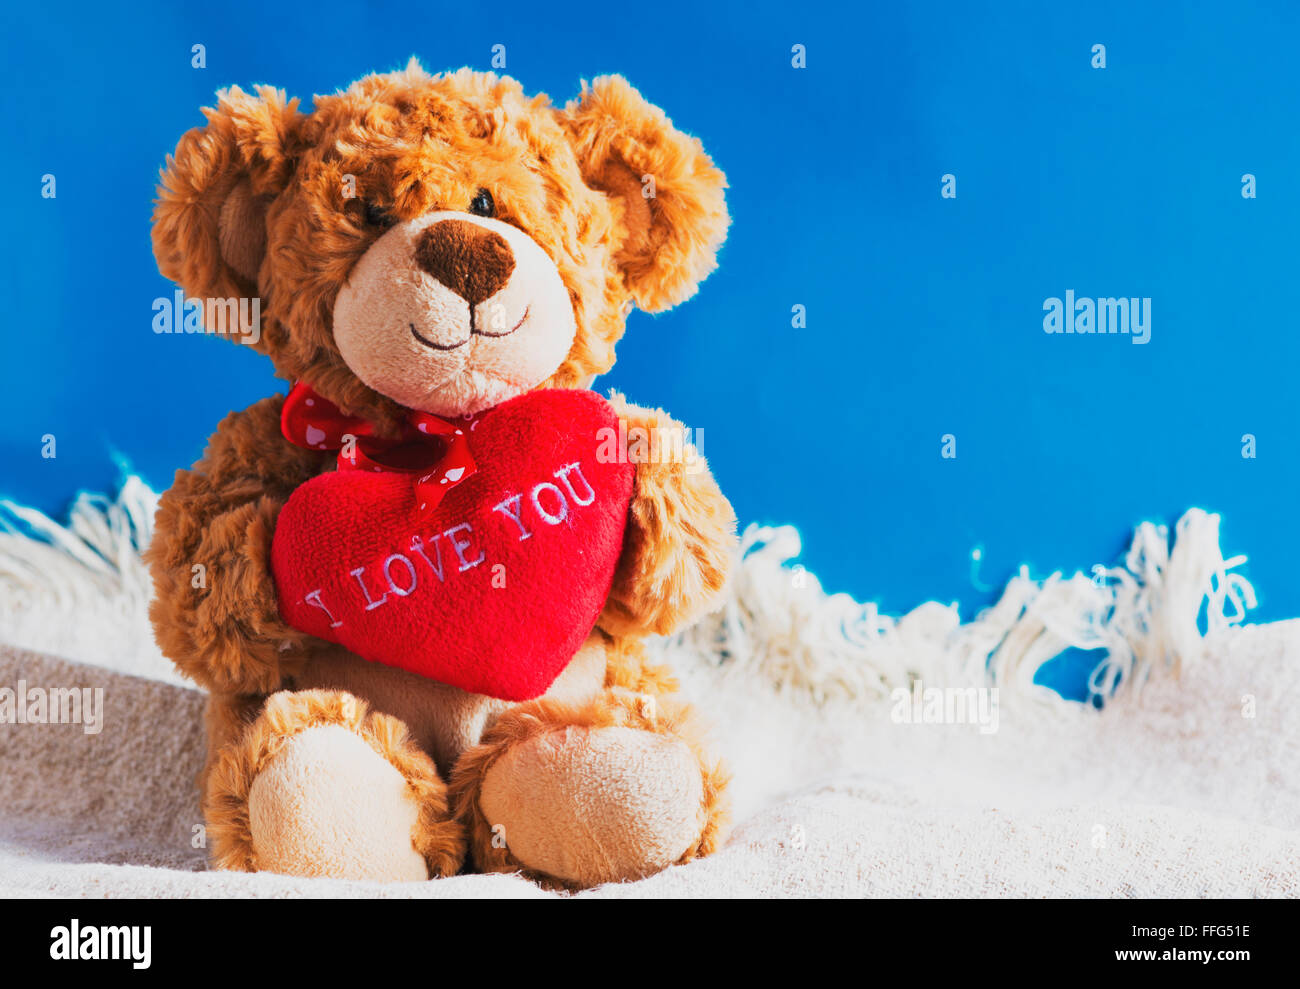 Teddy bear and big red heart with text 'I Love You' Stock Photo